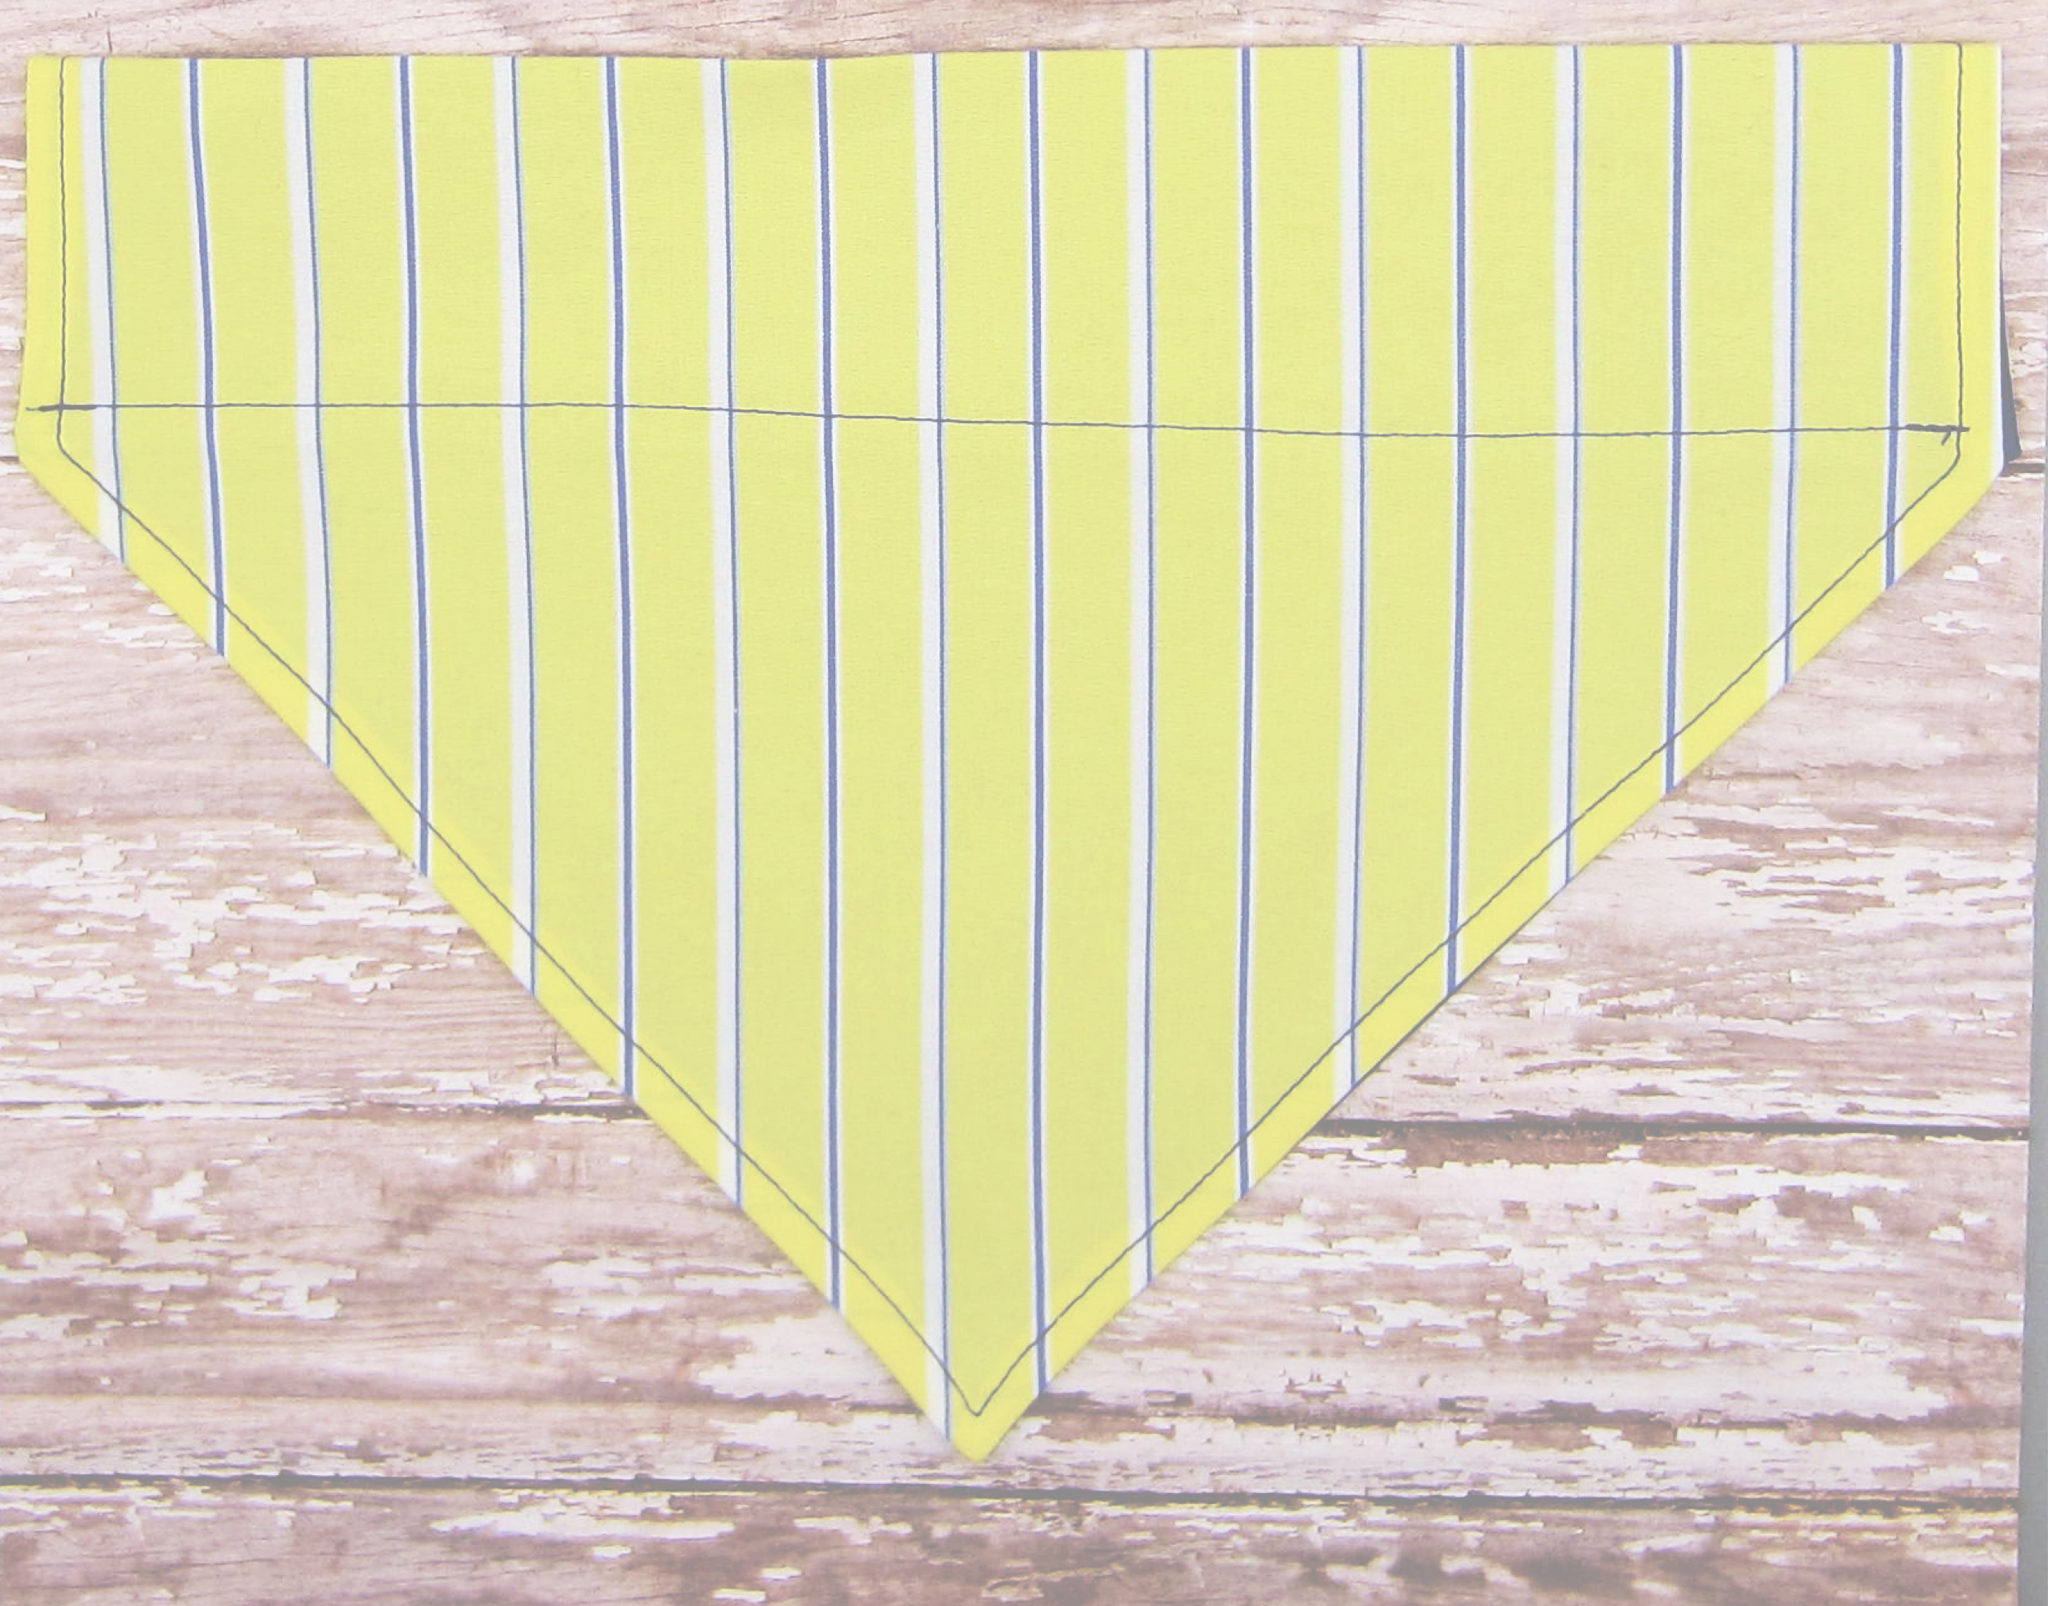 Yellow & Royal Stripe Pet Bandana- Fits Over Collar 4 Sizes Available